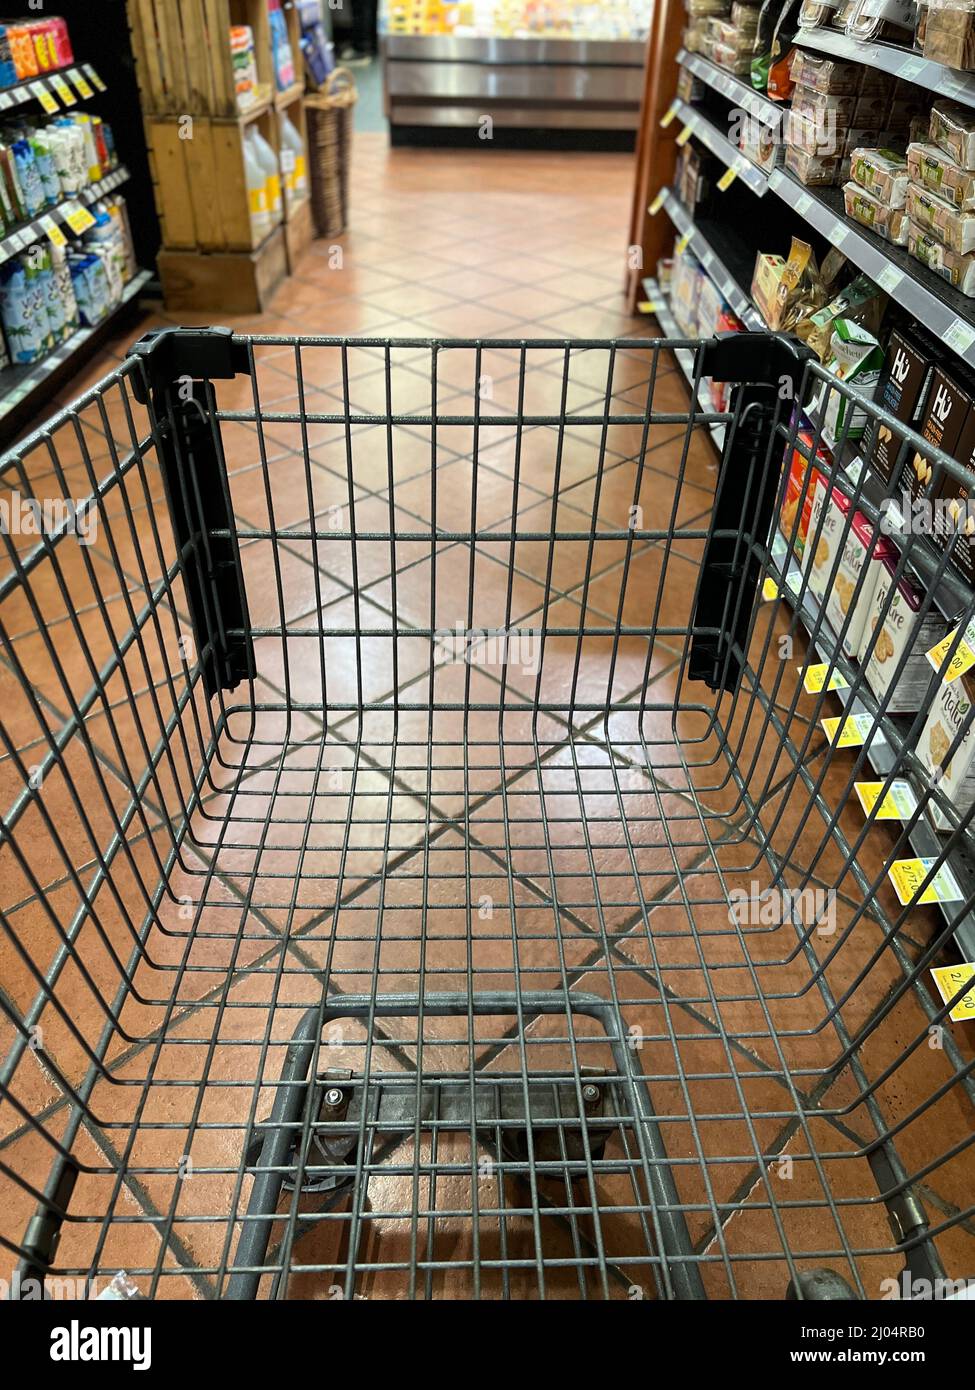 Grocery cart on a shopping trip going through the aisles Stock Photo